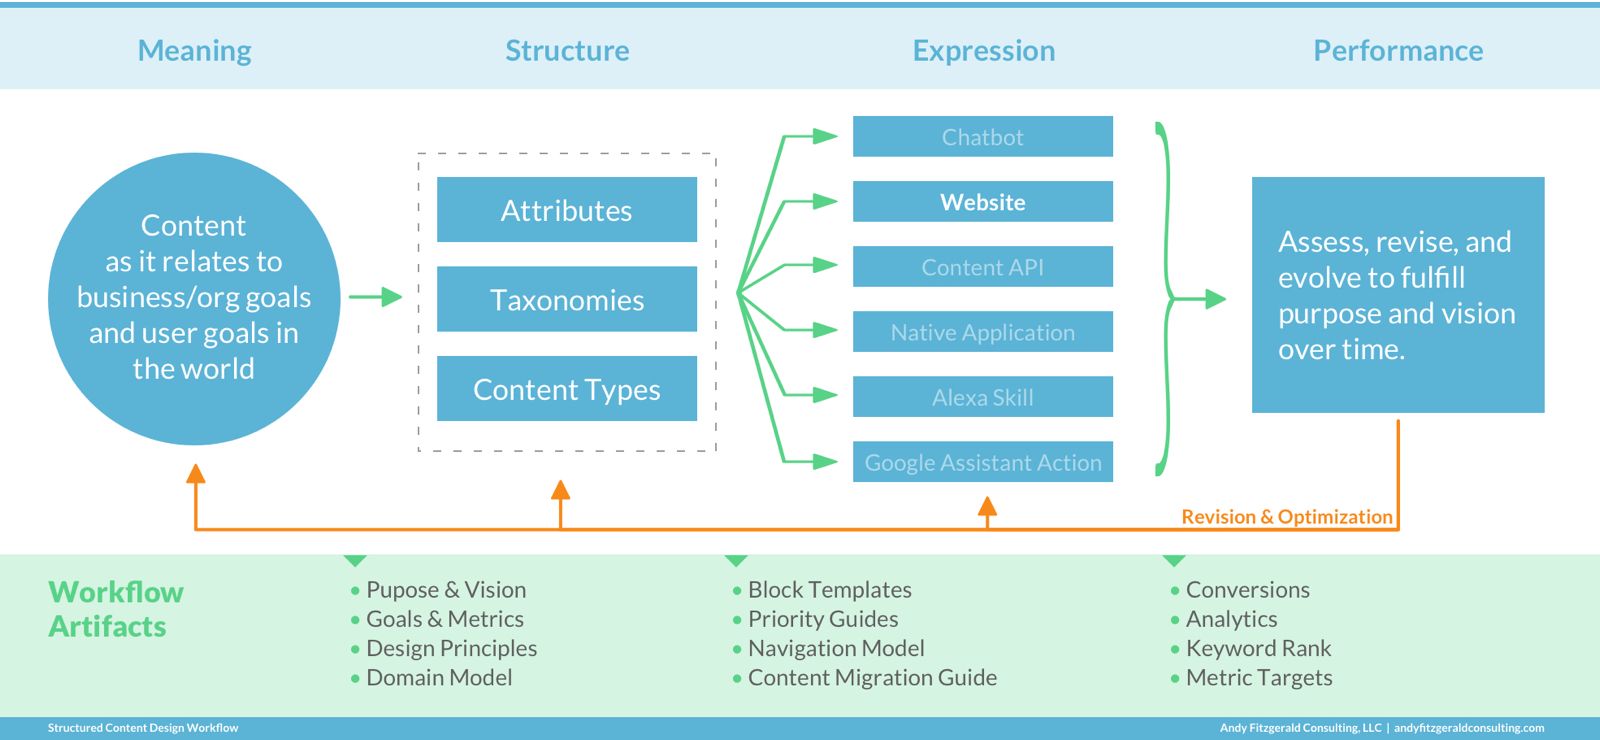 Diagram showing the flow of the structured content design process, from meaning, through structure, expression, and finally performance. Steps move from one to the next, and include loops back through each step for revision and optimization